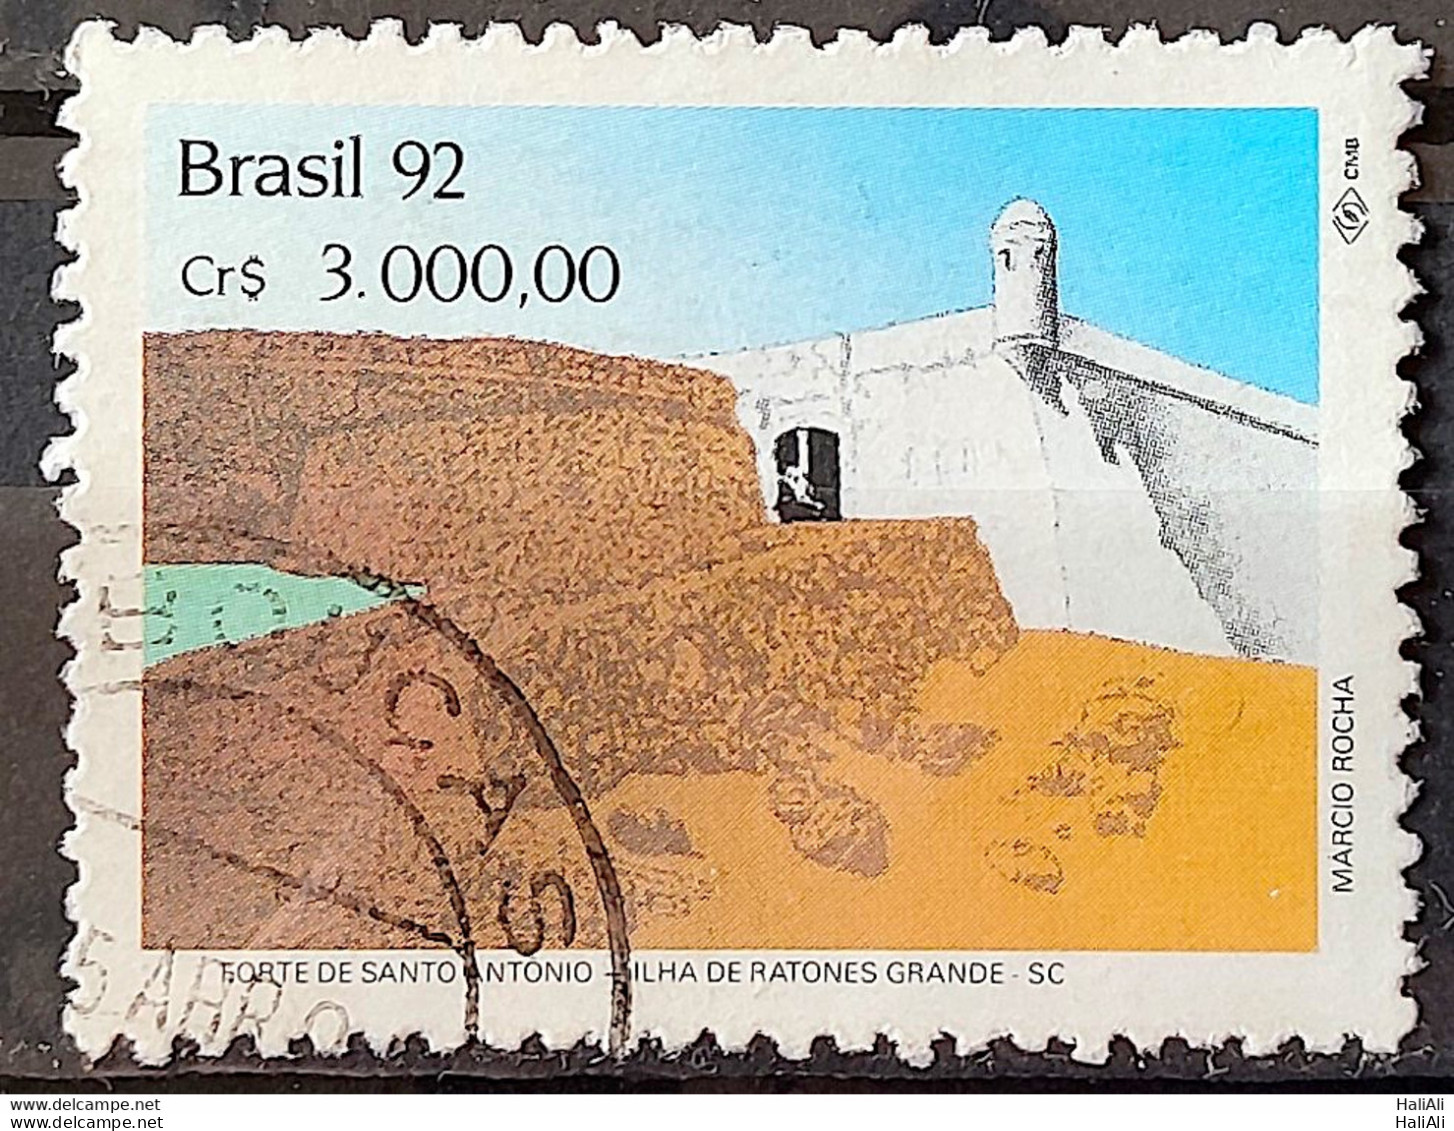 C 1816 Brazil Stamp Strong Military Architecture Big Ratone Island SC 1992 Circulated 1 - Used Stamps